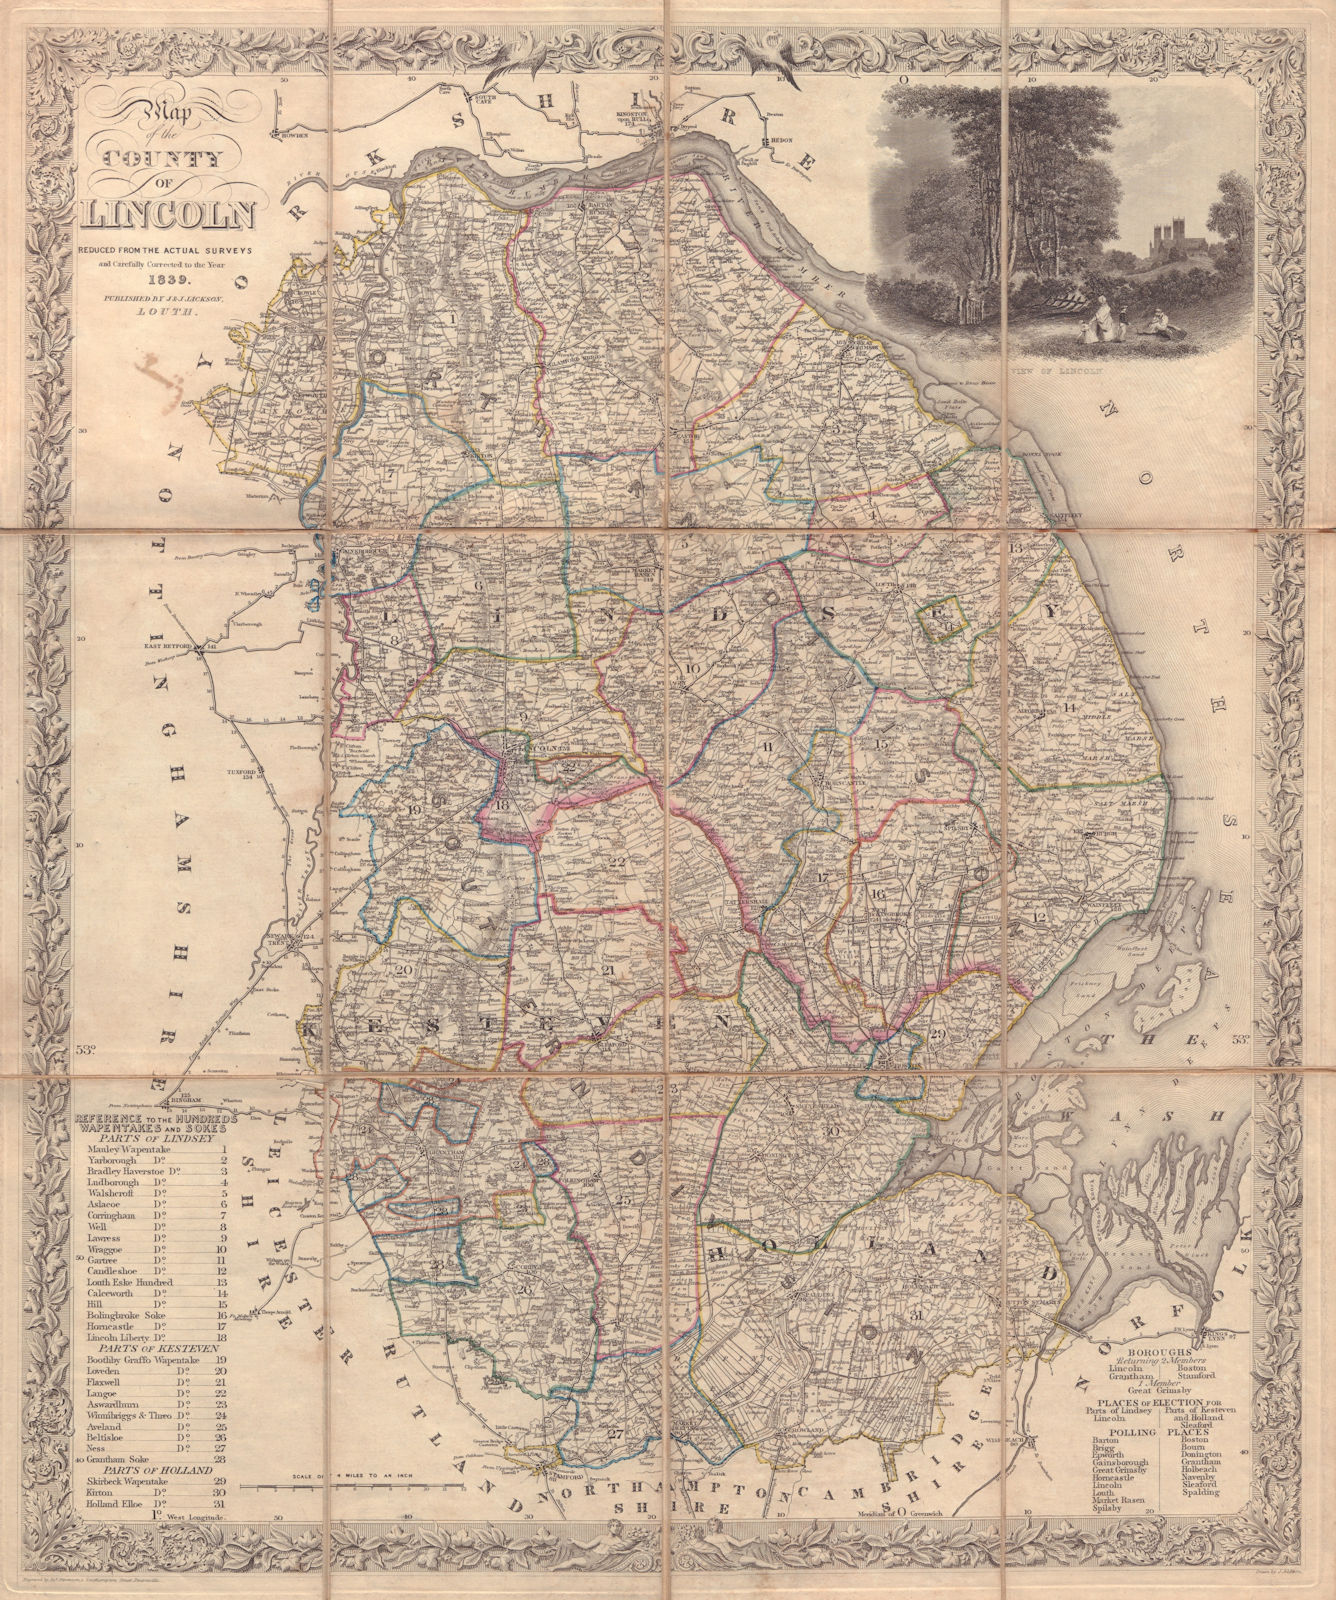 Associate Product Map of the county of Lincoln. Lincolnshire. 56x47cm. JACKSON 1839 old